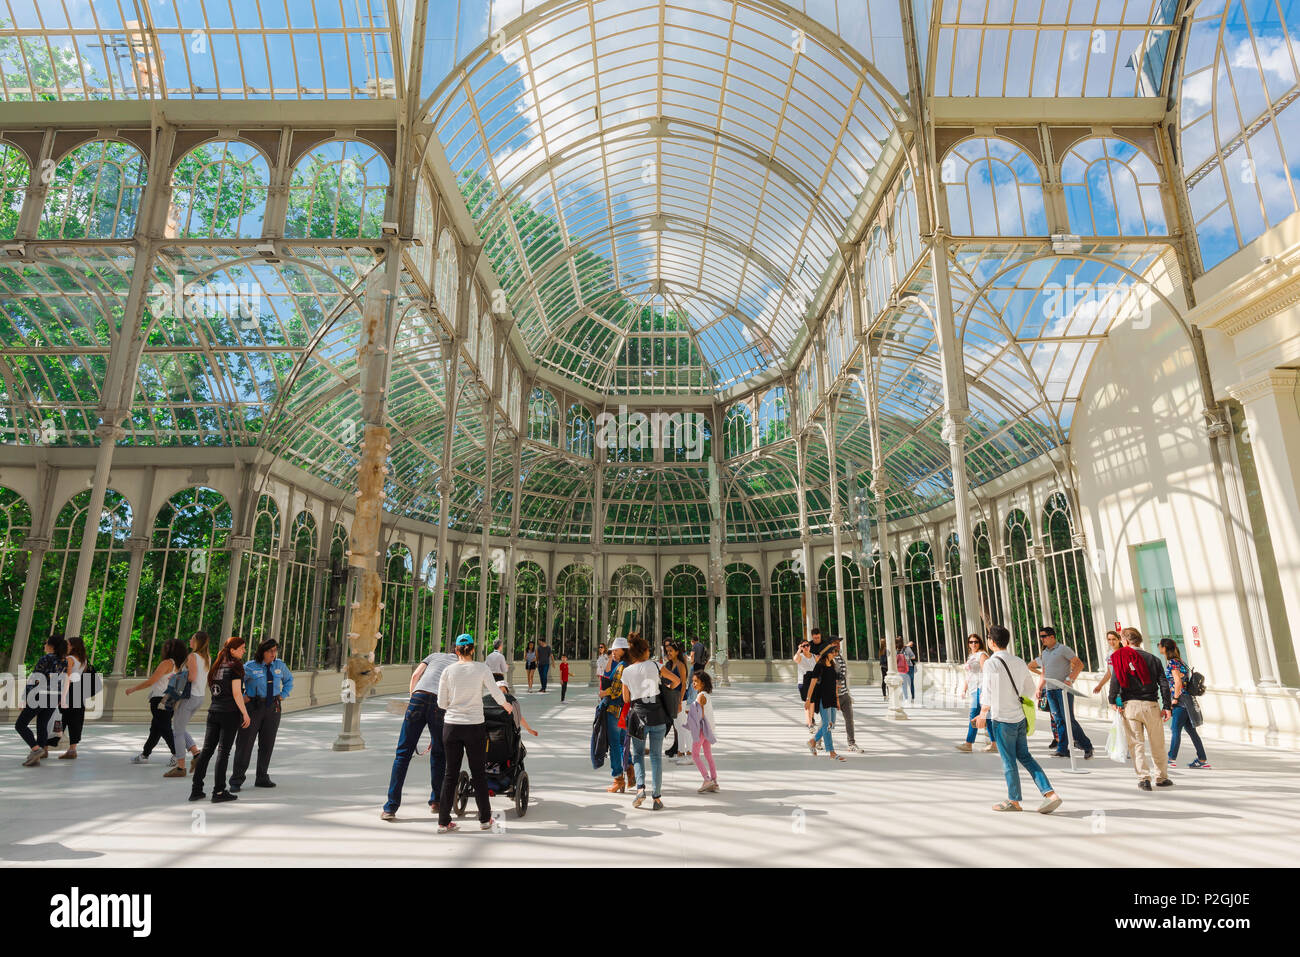 Madrid Retiro Crystal Palace, interior view of the Palacio de Cristal - a glass and wrought iron building in the Parque del Retiro in Madrid, Spain. Stock Photo